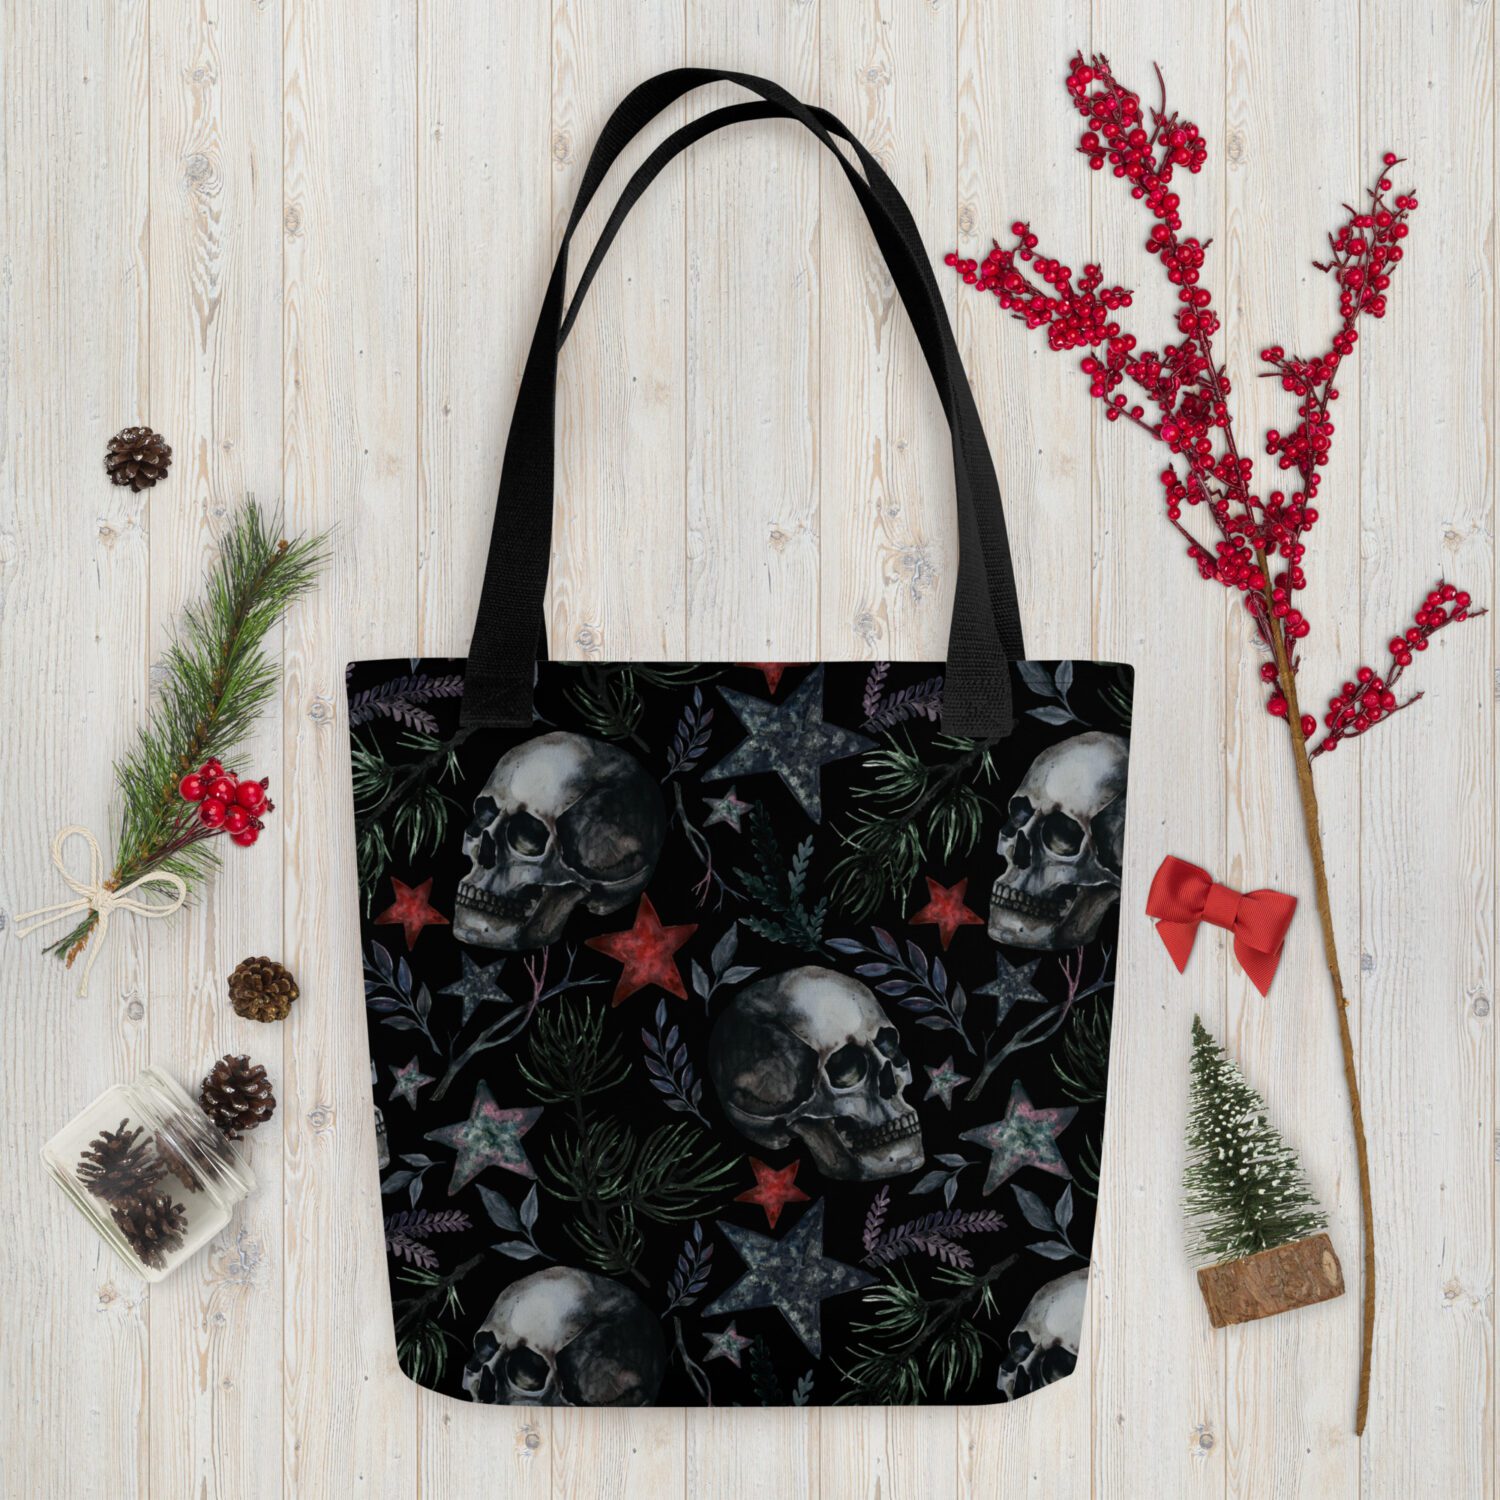 Tote bag 'Whitchy Winter'